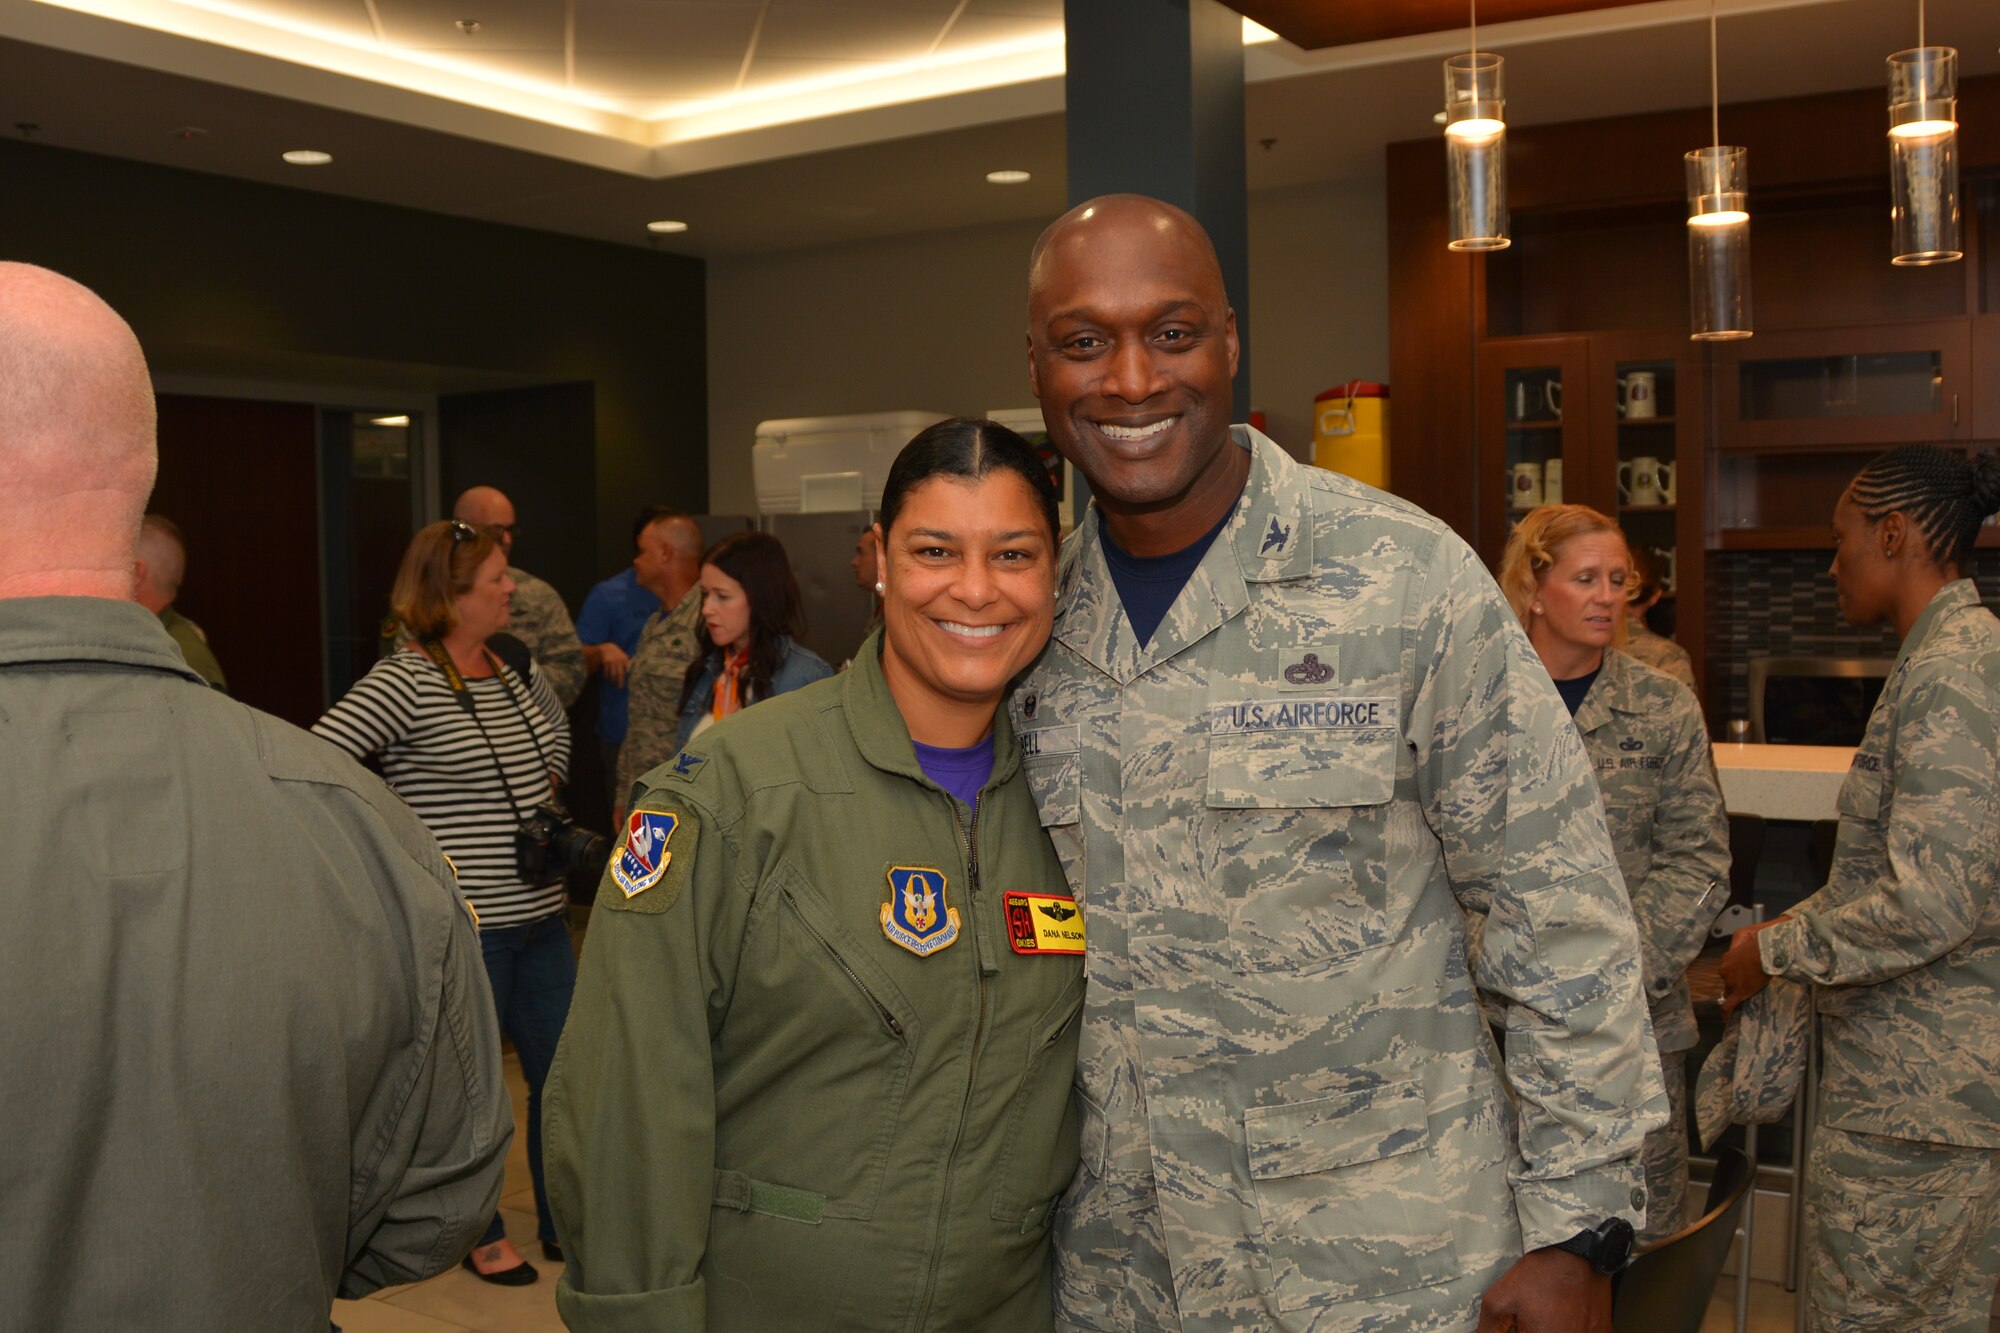 Among the Tinker Air Force Base, Oklaoma, leaders present for the 513th Air Control Group ribbon-cutting event Sept. 7, 2018, were Col. Dana Nelson, 507th Air Refueling Wing vice commander, and Col. Kenyon Bell, 72nd Air Base Wing commander. The 72nd ABW is the host installation command for Tinker AFB, Oklahoma, of which the 513th ACG is a tenant. The 507th ARW is the larger AFRC organization present at Tinker. The 507th ARW maintains a fleet of eight KC-135 Stratotankers and provides administrative support to the 513th ACG. The 513th Air Control Group is the only Air Force Reserve unit to fly and maintain the E-3 Sentry, an Airborne Warning and Control System aircraft that provides surveillance, warning and tactical control of U.S. and allied military aircraft. As a Reserve Associate Unit, 513th ACG Airmen assigned work hand-in-hand with the active-duty 552nd Air Control Wing, contributing reliable AWACS support to numerous missions worldwide regularly. (Air Force photo by Master Sgt. Grady Epperly)